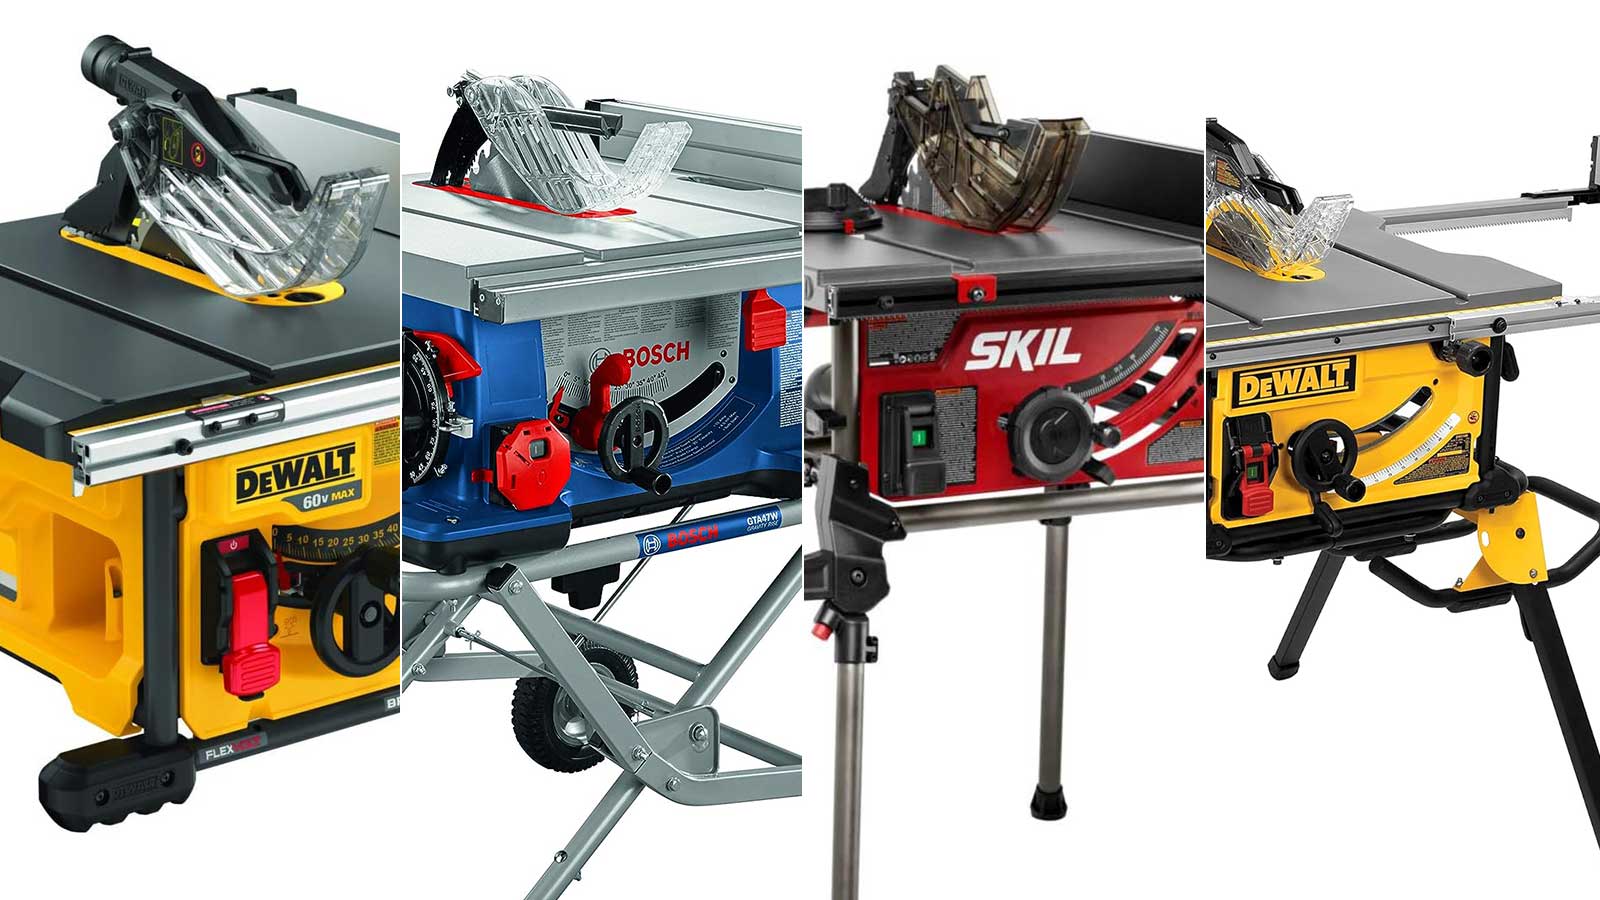 The best table saws for any job, according to experts